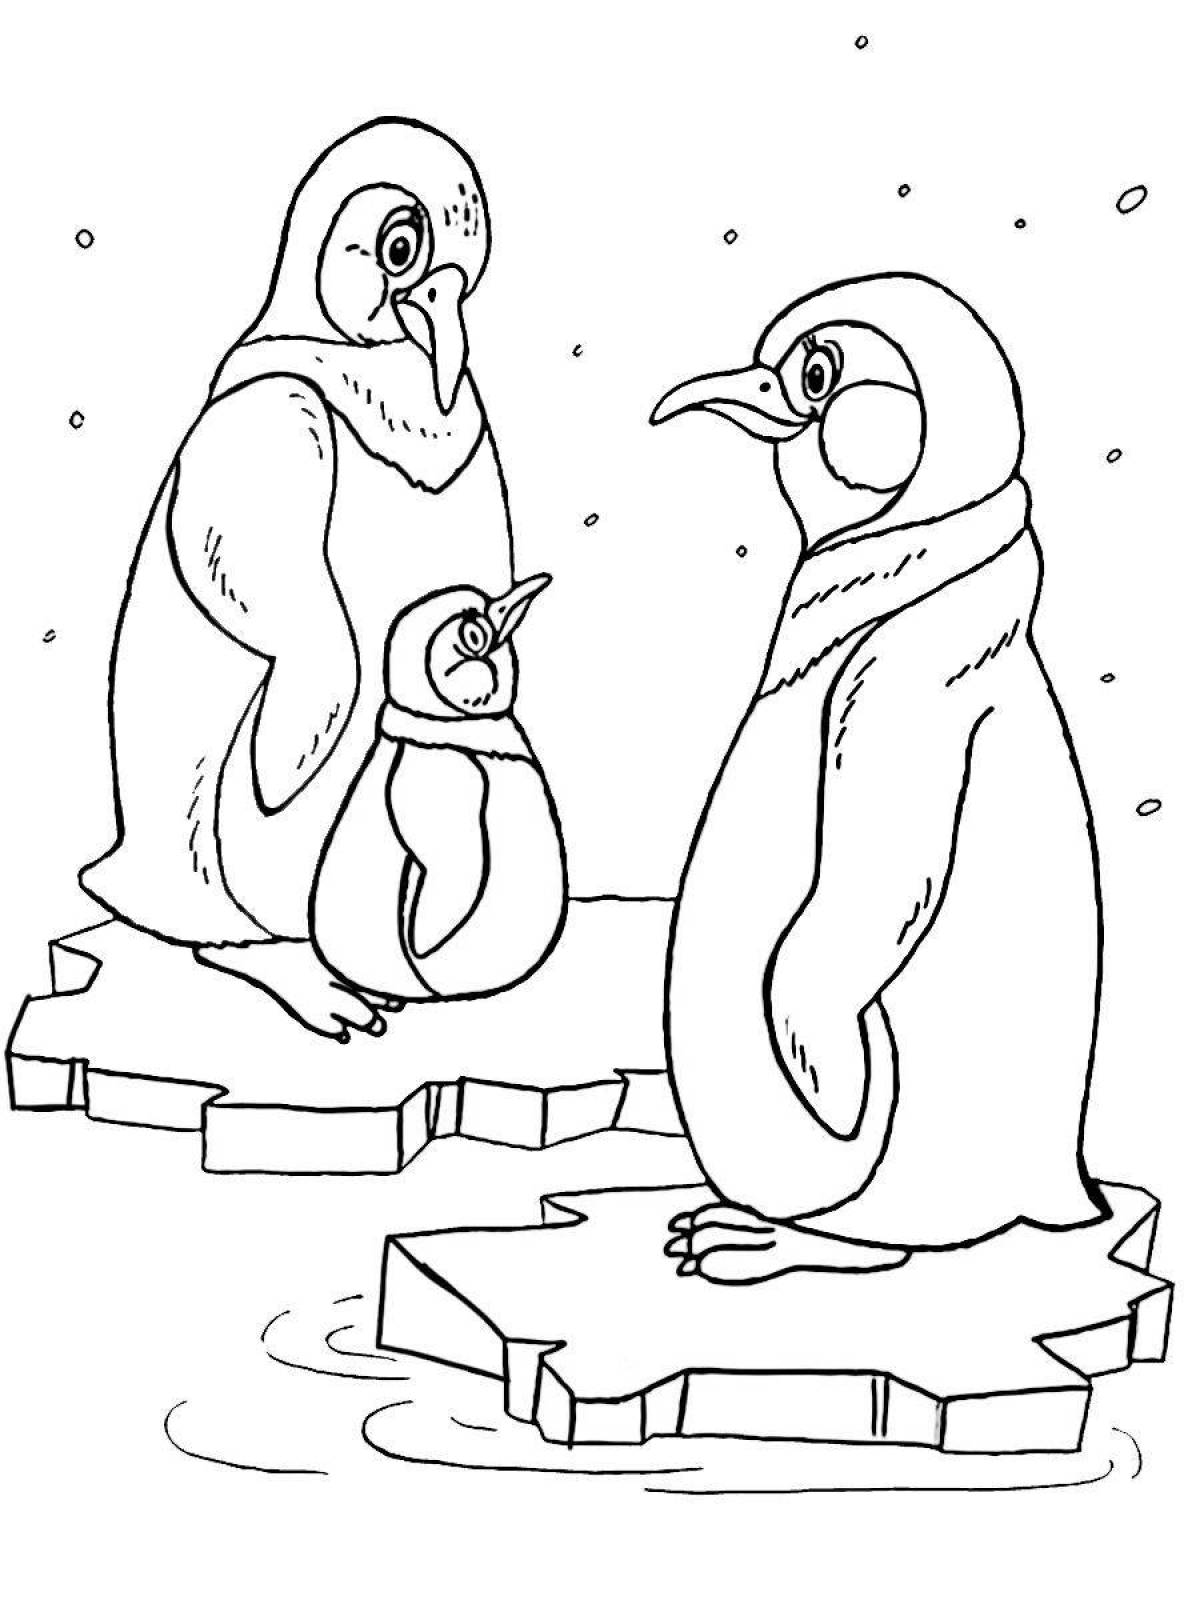 Coloring a cute penguin on an ice floe for kids